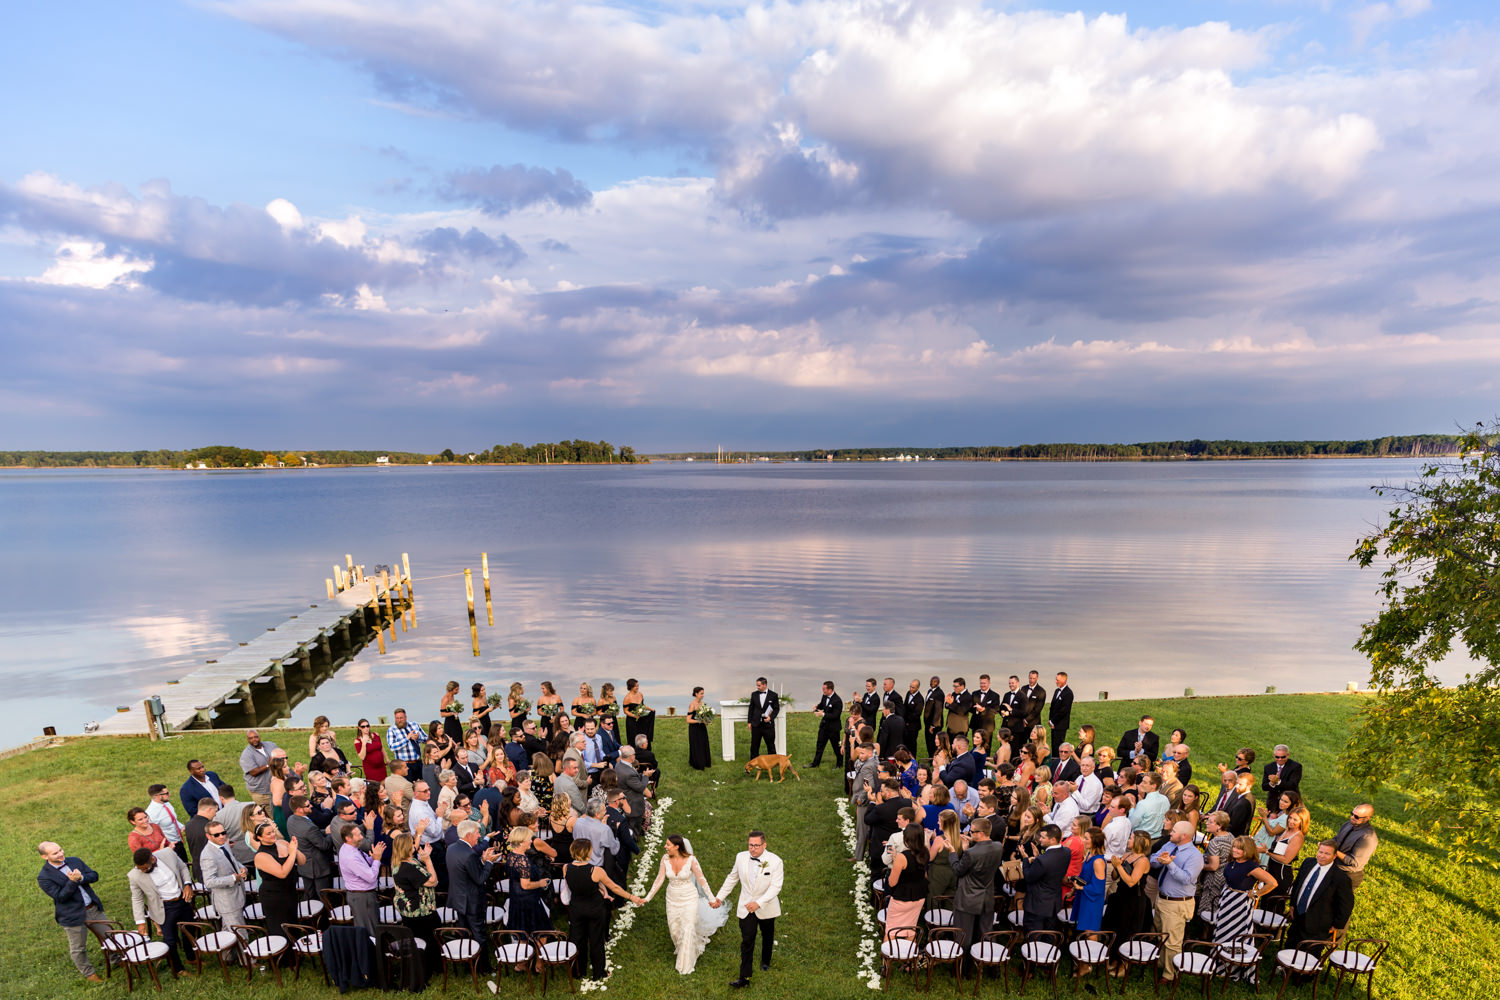 This was an Eastern Shore Maryland Wedding, Swan Cove Manor, I photographed the ceremony recessional from the roof of a nearby house, The couple and the entire wedding can be seen at the last moment of their recessional almost walking off frame in an arial view, The clouds and ocean behind them make an incredibly romantic backdrop, The guests cheer as the newly married couple walks back down the aisle, Their dog was their ring bearer, Be different, Procopio Photography, best top Washington DC photographer, best top Maryland photographer, best top Virginia photographer, best top DMV photographer, best top wedding photographer, best top commercial photographer, best top portrait photographer, best top boudoir photographer, modern fine art portraits, dramatic, unique, different, bold, editorial, photojournalism, award winning photographer, published photographer, memorable images, be different, stand out